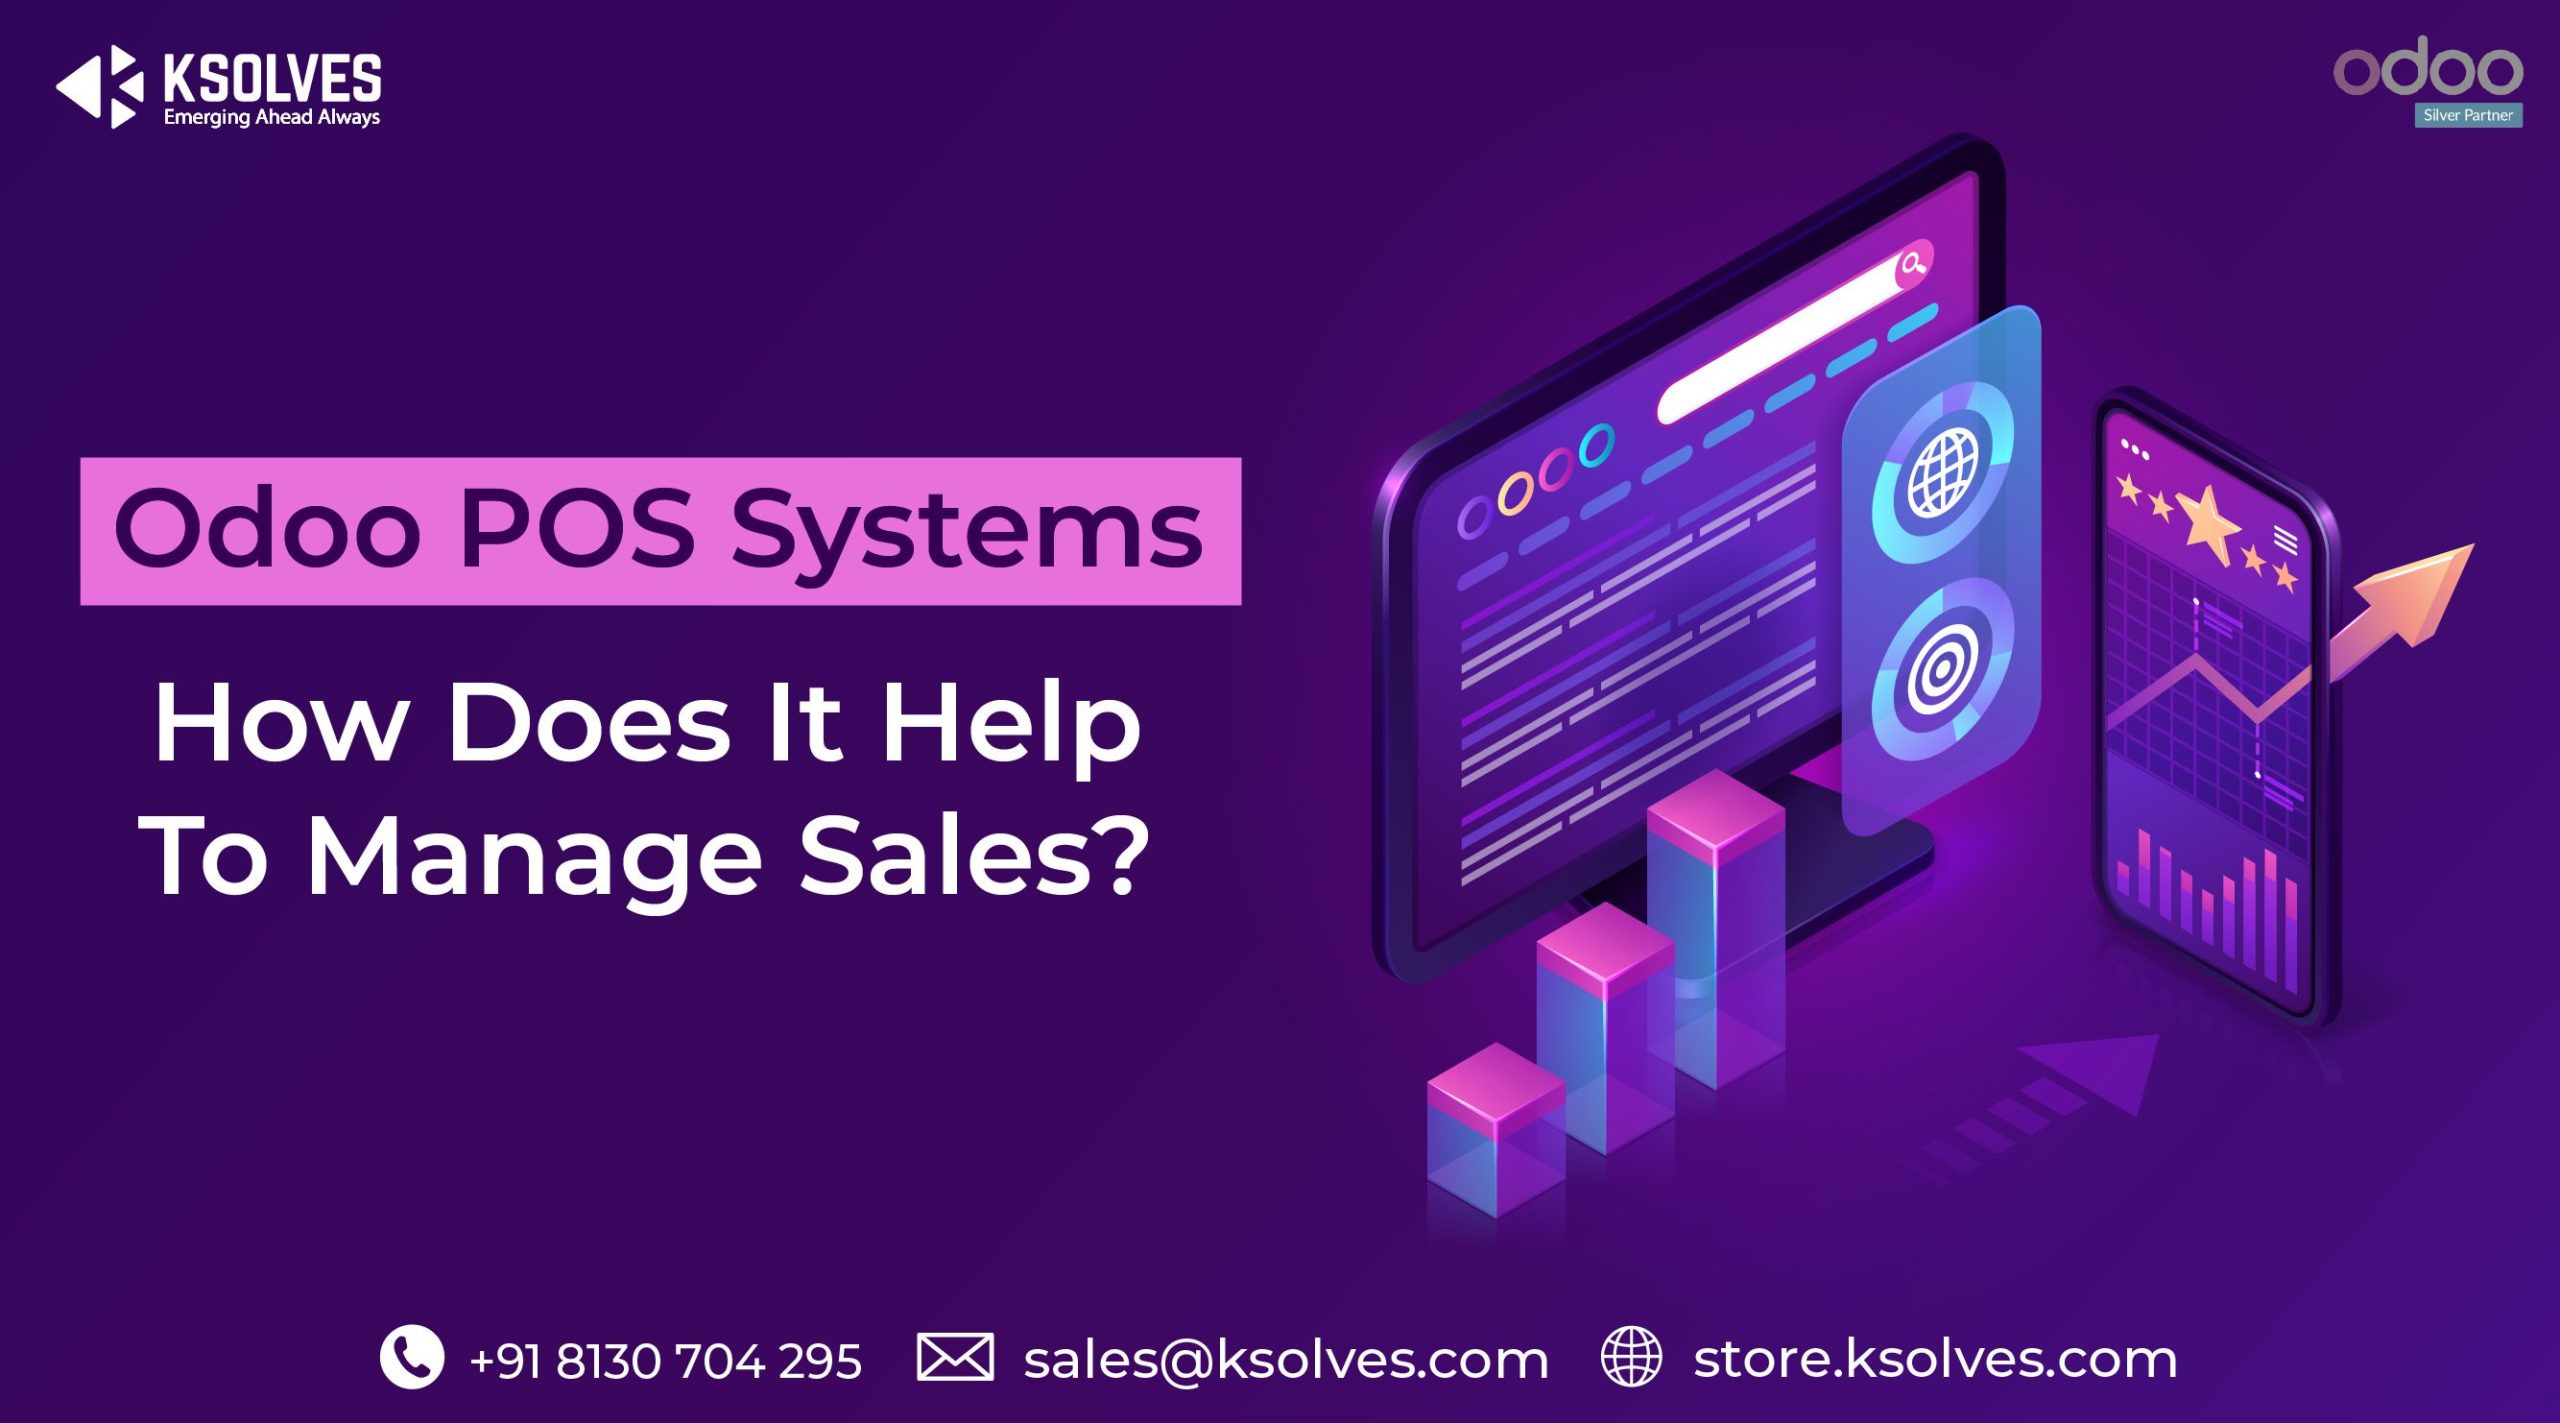 Odoo POS Systems How Does It Help To Manage Sales